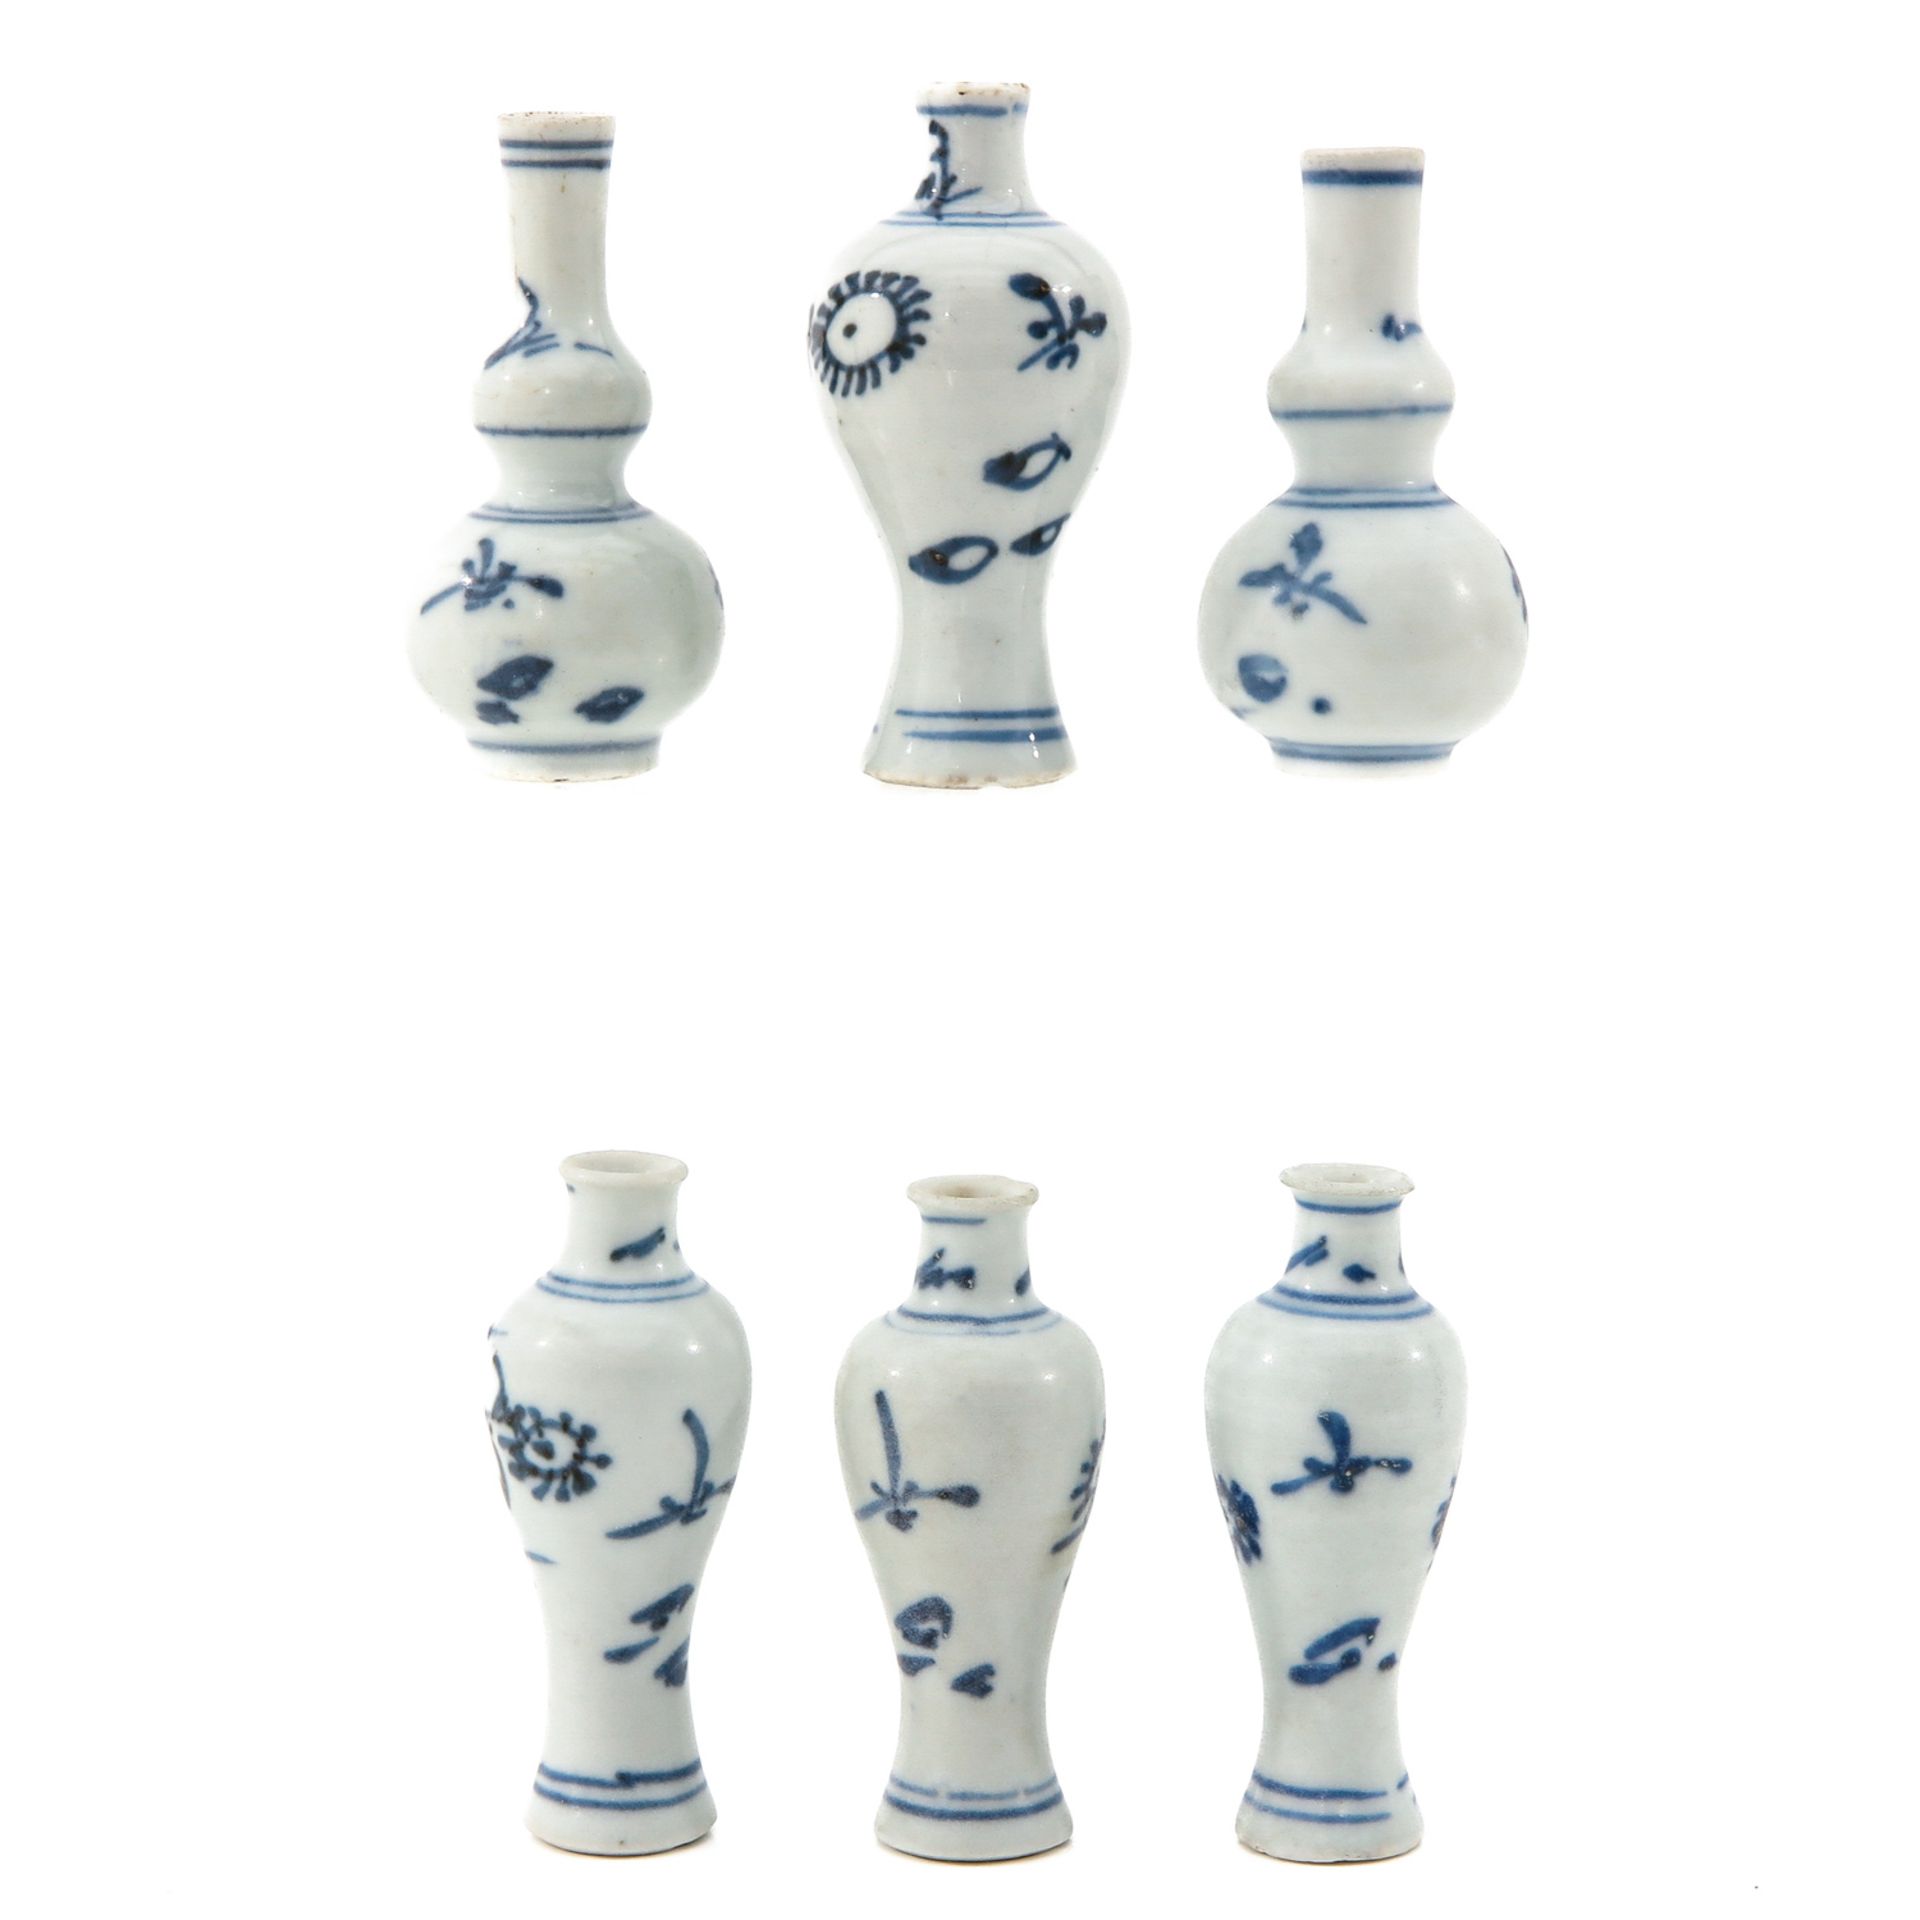 A Collection of 6 Miniature Vases - Image 3 of 10